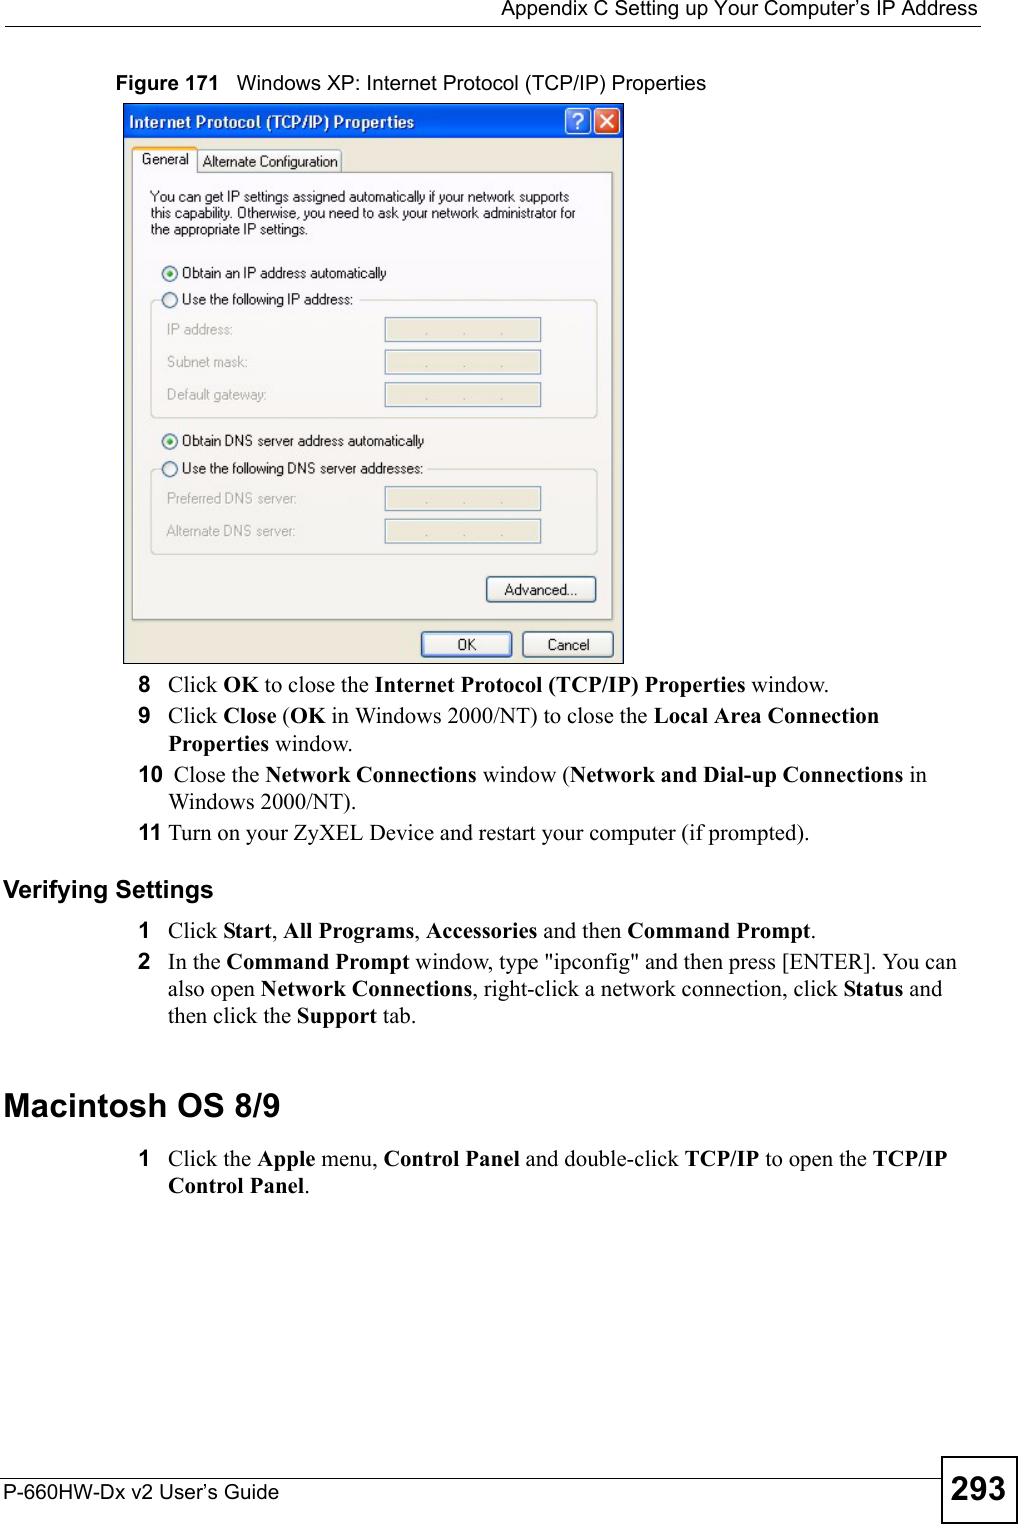  Appendix C Setting up Your Computer’s IP AddressP-660HW-Dx v2 User’s Guide 293Figure 171   Windows XP: Internet Protocol (TCP/IP) Properties8Click OK to close the Internet Protocol (TCP/IP) Properties window.9Click Close (OK in Windows 2000/NT) to close the Local Area Connection Properties window.10  Close the Network Connections window (Network and Dial-up Connections in Windows 2000/NT).11 Turn on your ZyXEL Device and restart your computer (if prompted).Verifying Settings1Click Start, All Programs, Accessories and then Command Prompt.2In the Command Prompt window, type &quot;ipconfig&quot; and then press [ENTER]. You can also open Network Connections, right-click a network connection, click Status and then click the Support tab.Macintosh OS 8/9 1Click the Apple menu, Control Panel and double-click TCP/IP to open the TCP/IP Control Panel.